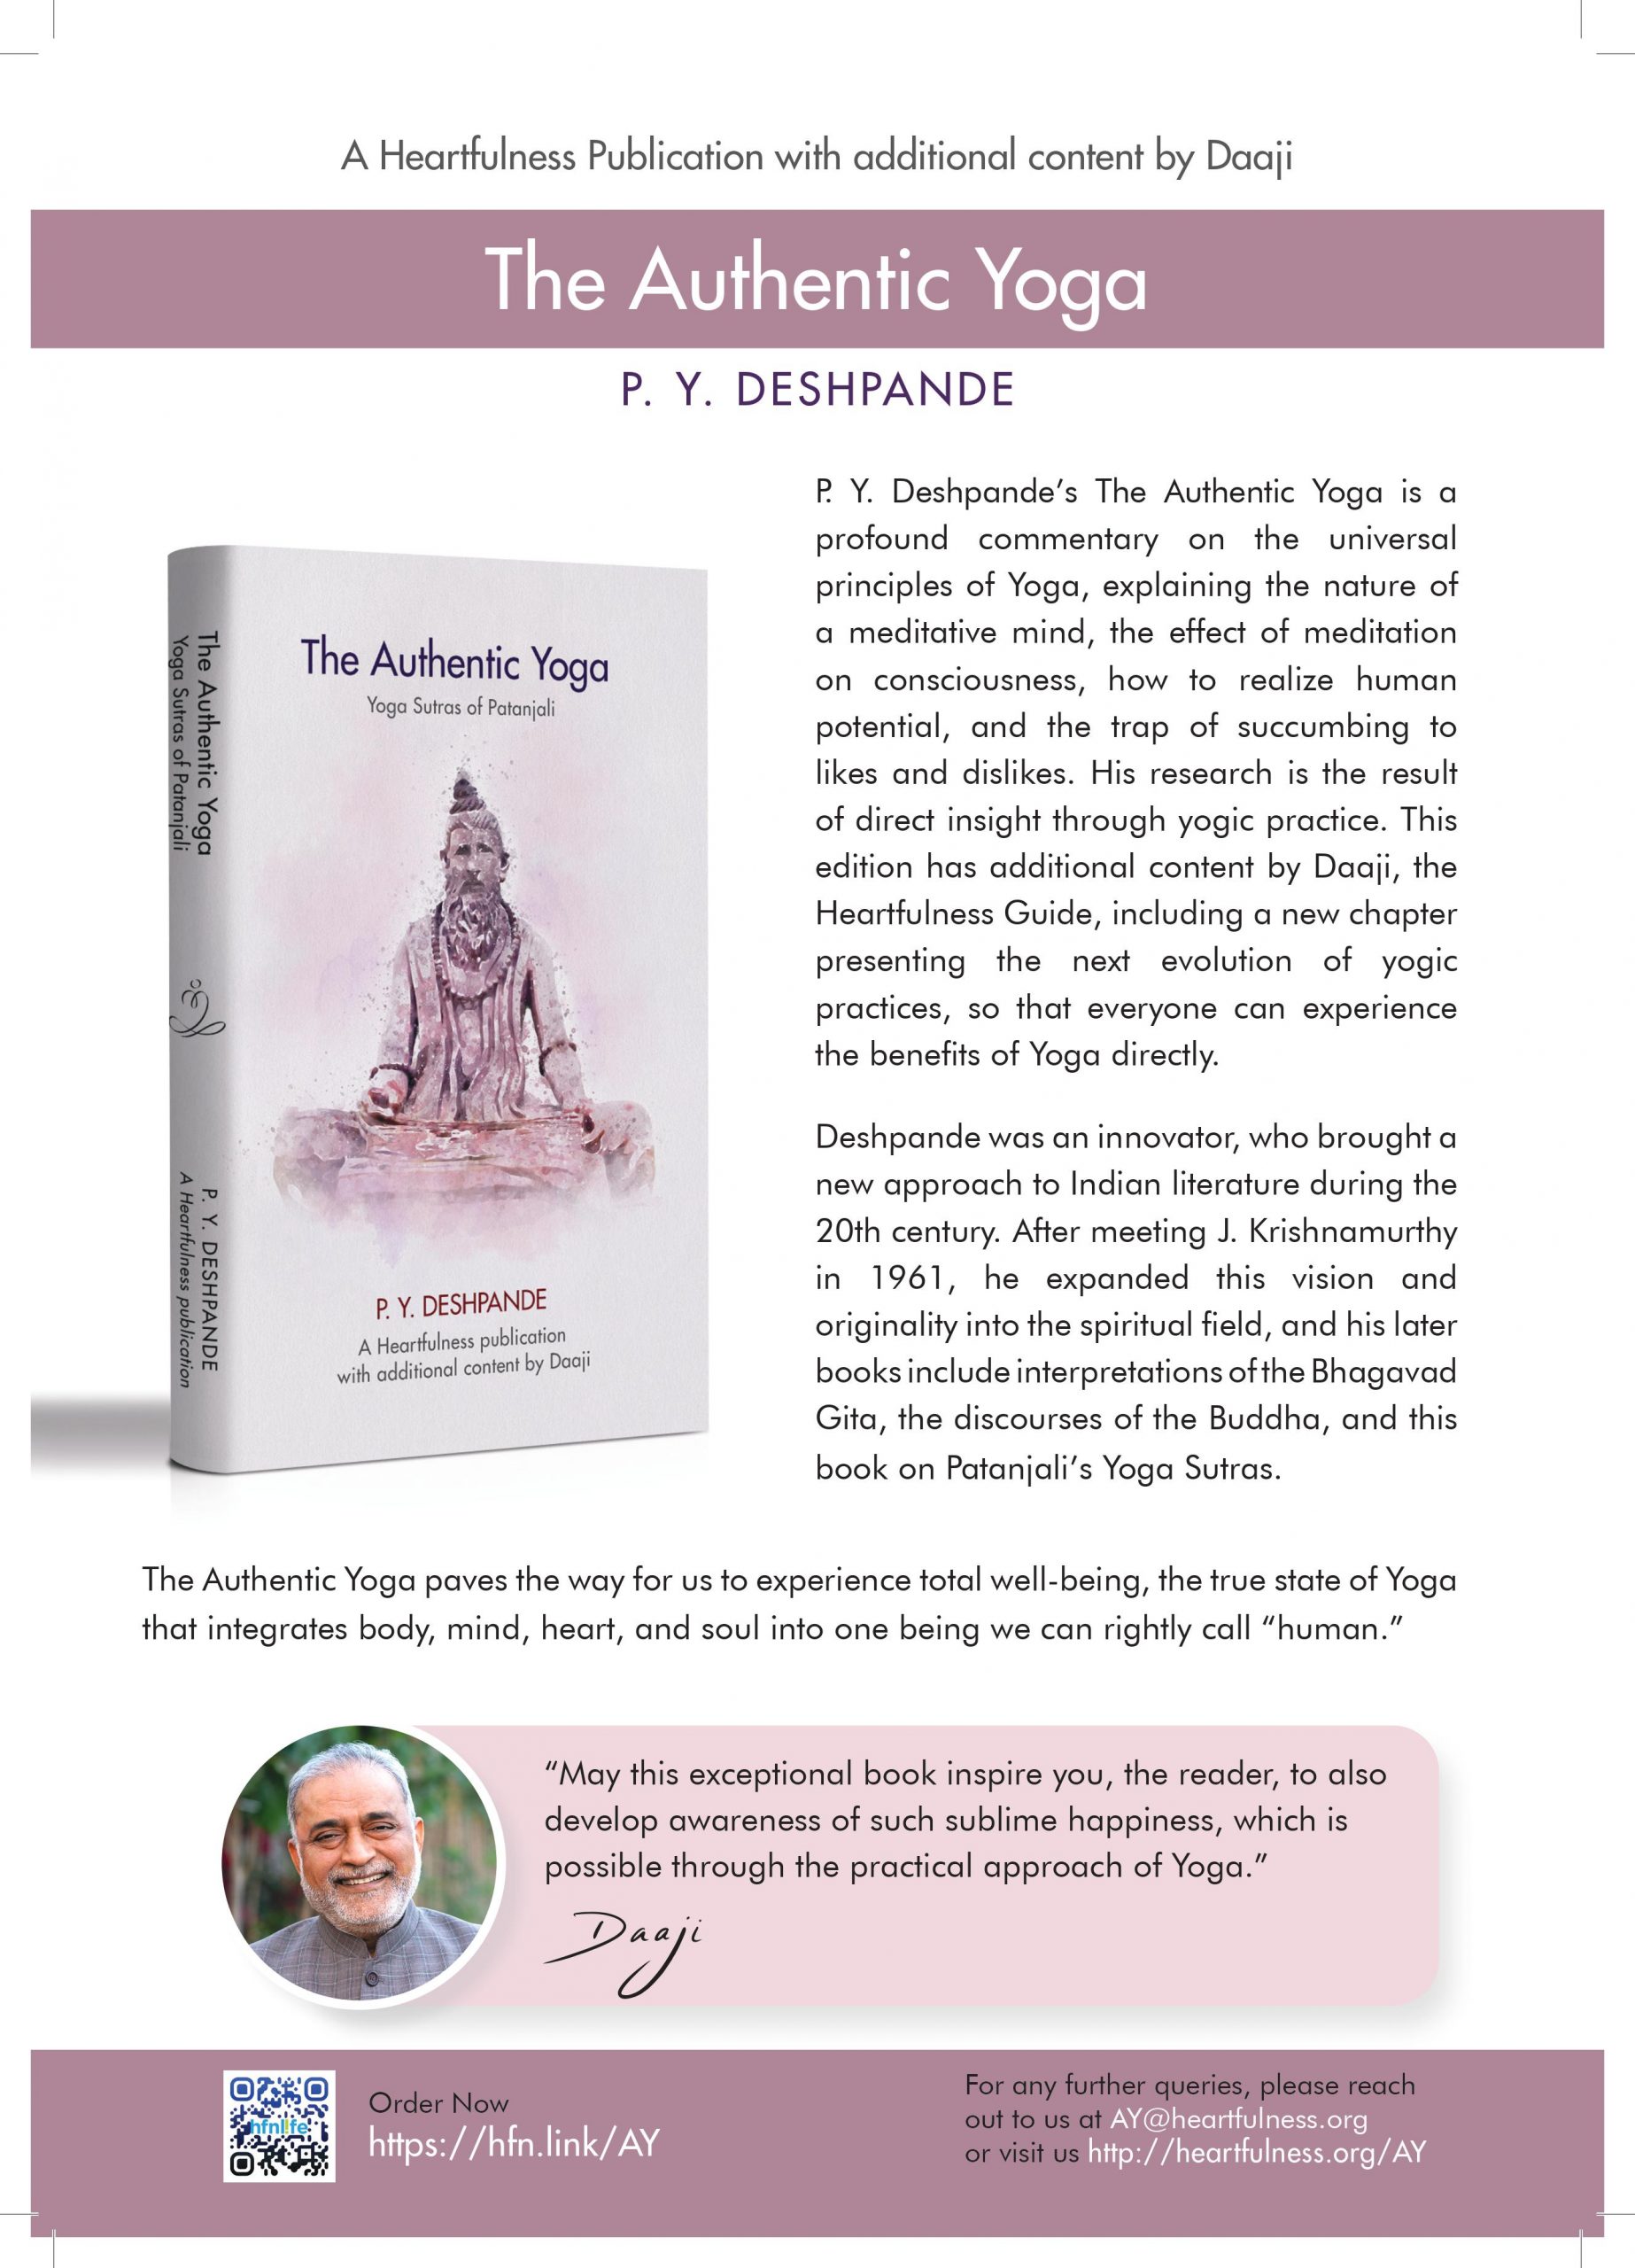 You are currently viewing Heartfulness’ Launches ‘The Authentic Yoga’ Book, Brings Yoga Closer To One and All